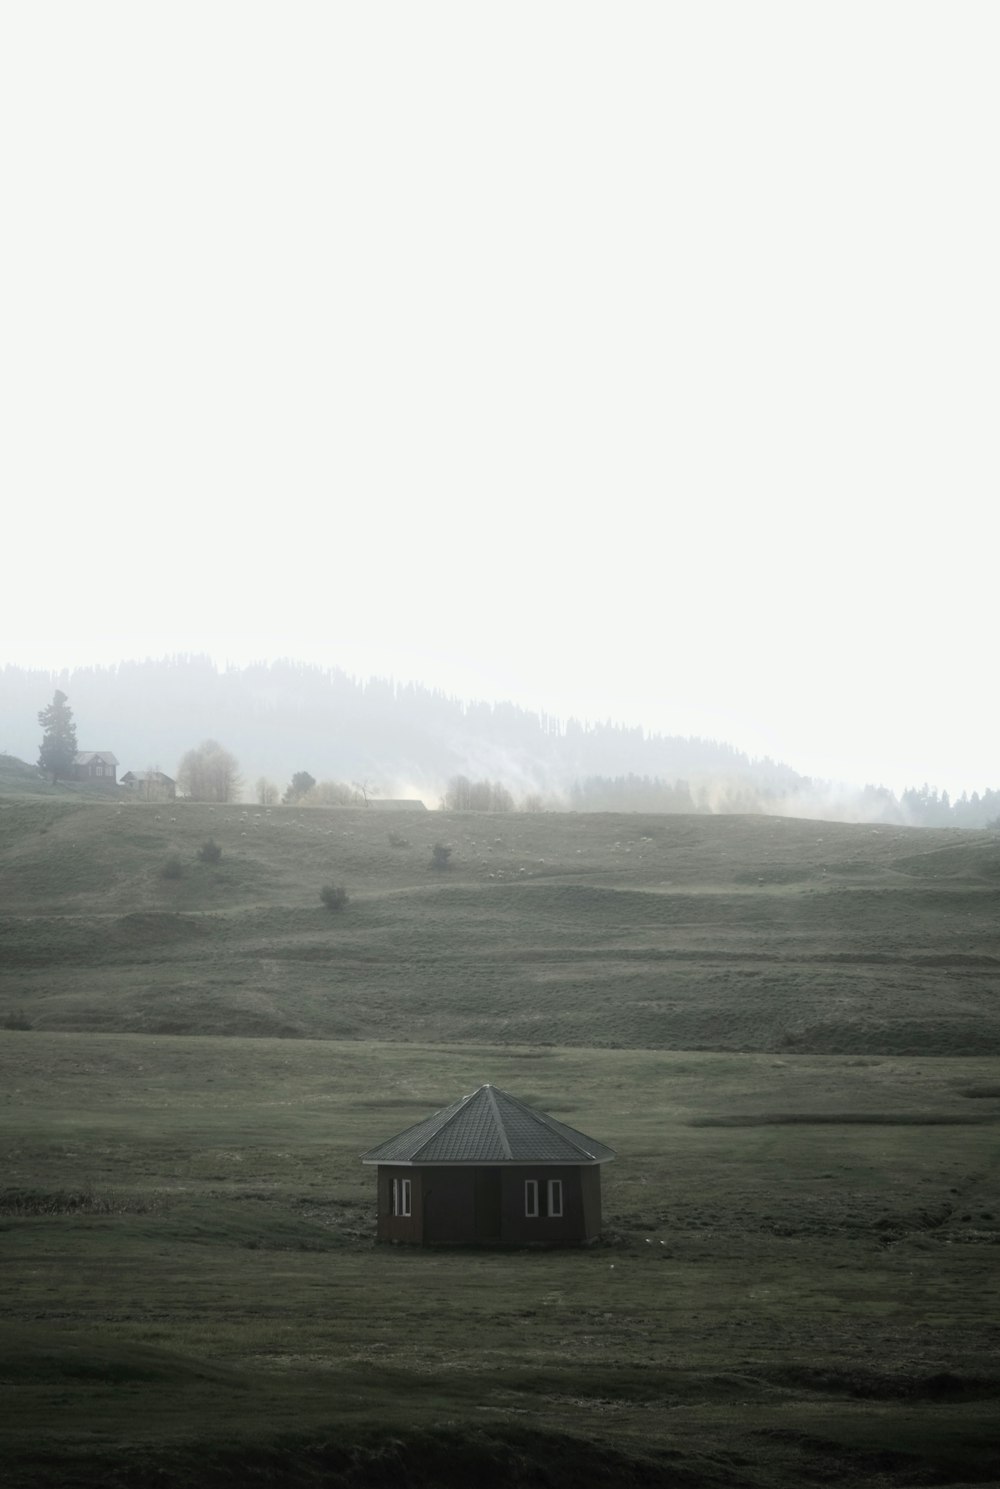 a small house in a field with a mountain in the background